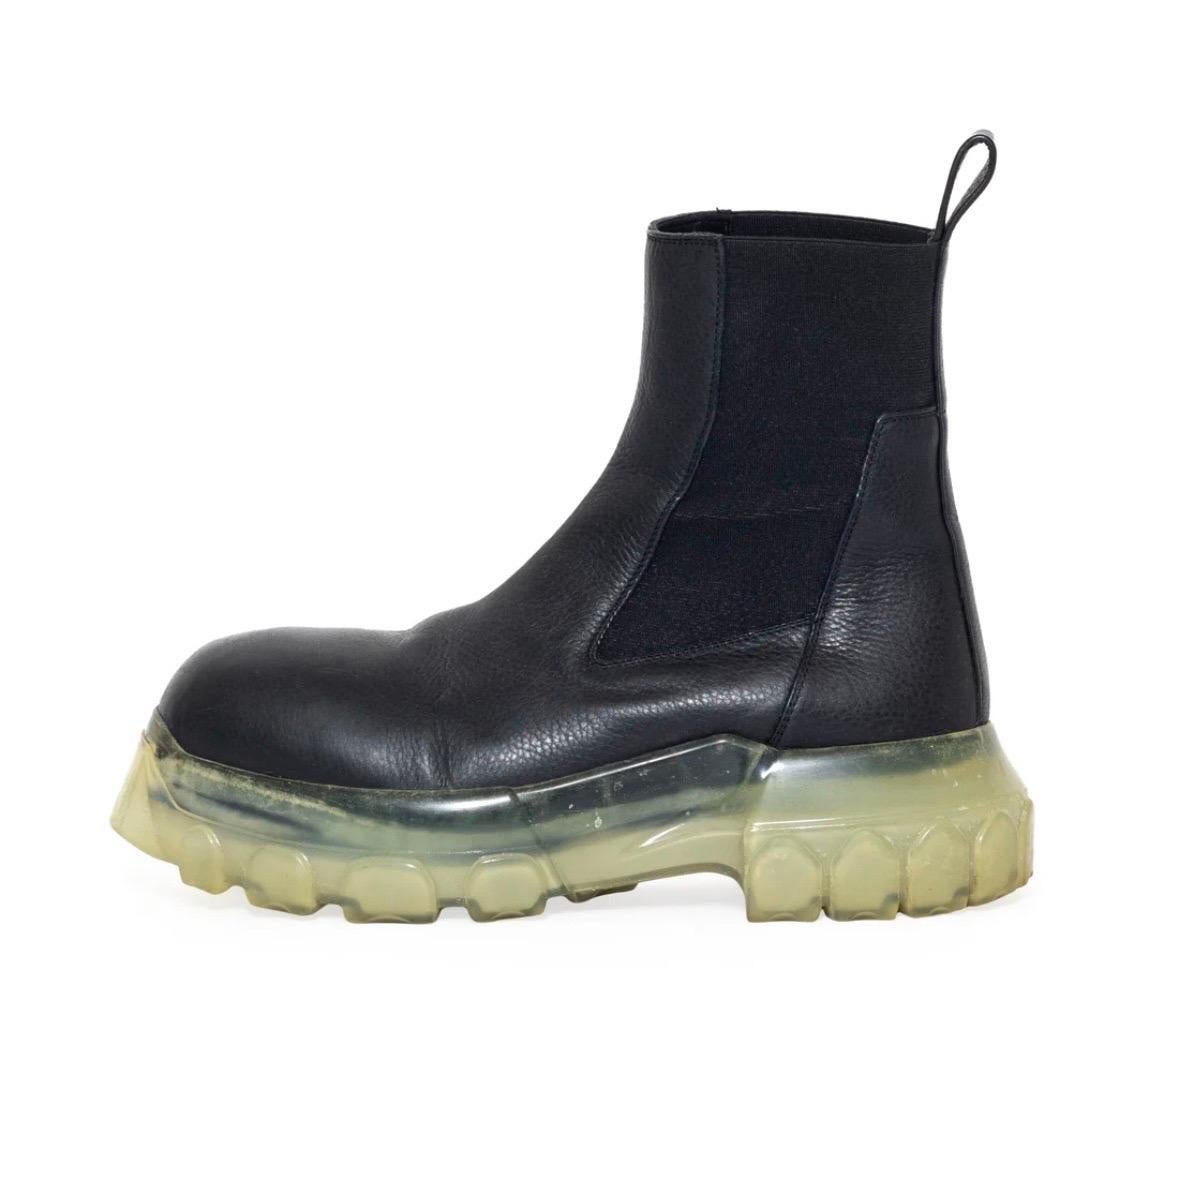 Rick Owens Black and Transparent Beatle Bozo Tractor Boots Size 38 (Spring 2021) For Sale 1